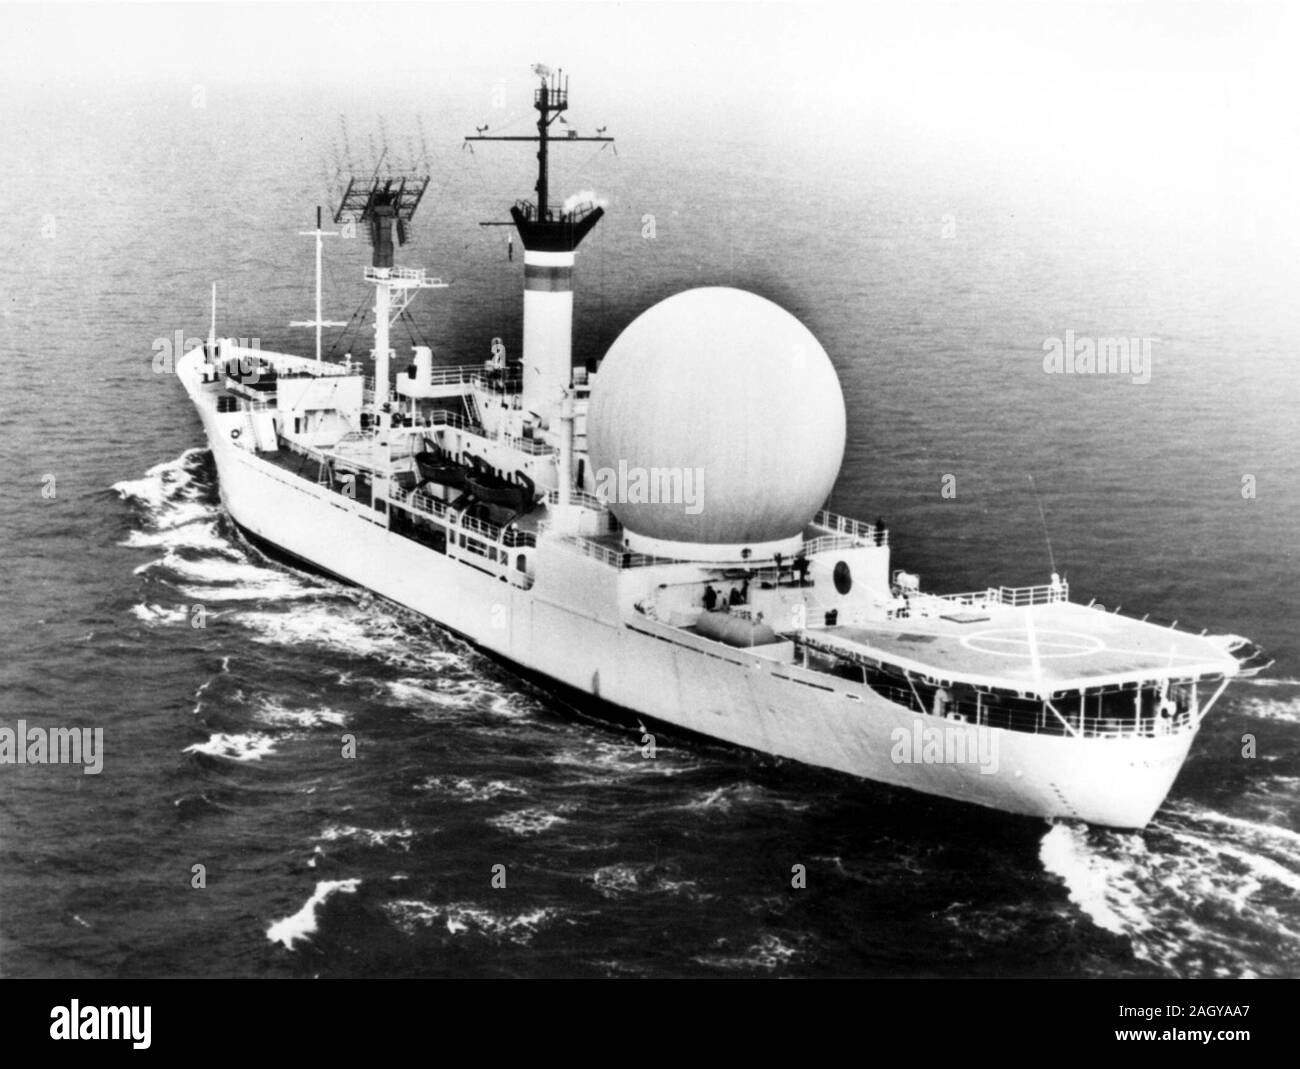 In 1962, the United States Navy built the first satellite communications ship, the U.S.N.S. Kingsport. The picture shows a 53- foot white plastic dome protecting a 30-foot stabilized parabolic antenna. Stock Photo